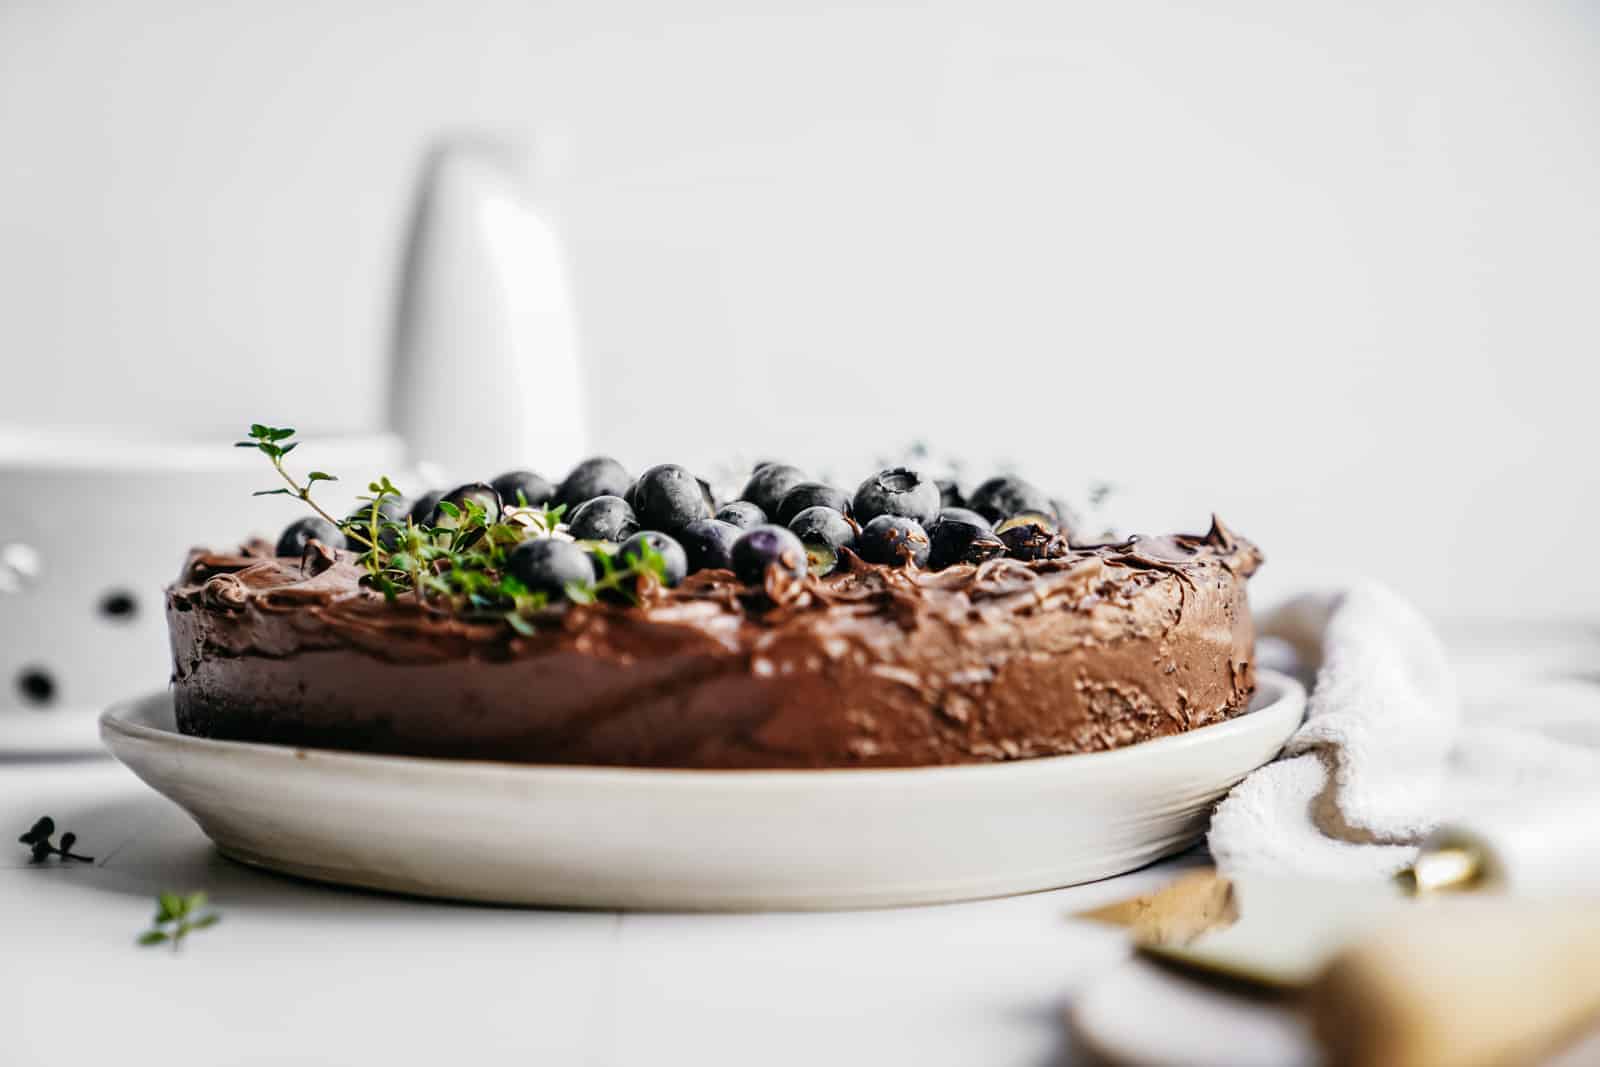 Side angle shot of a vegan chocolate cake that is topped with blueberries and fresh herbs.